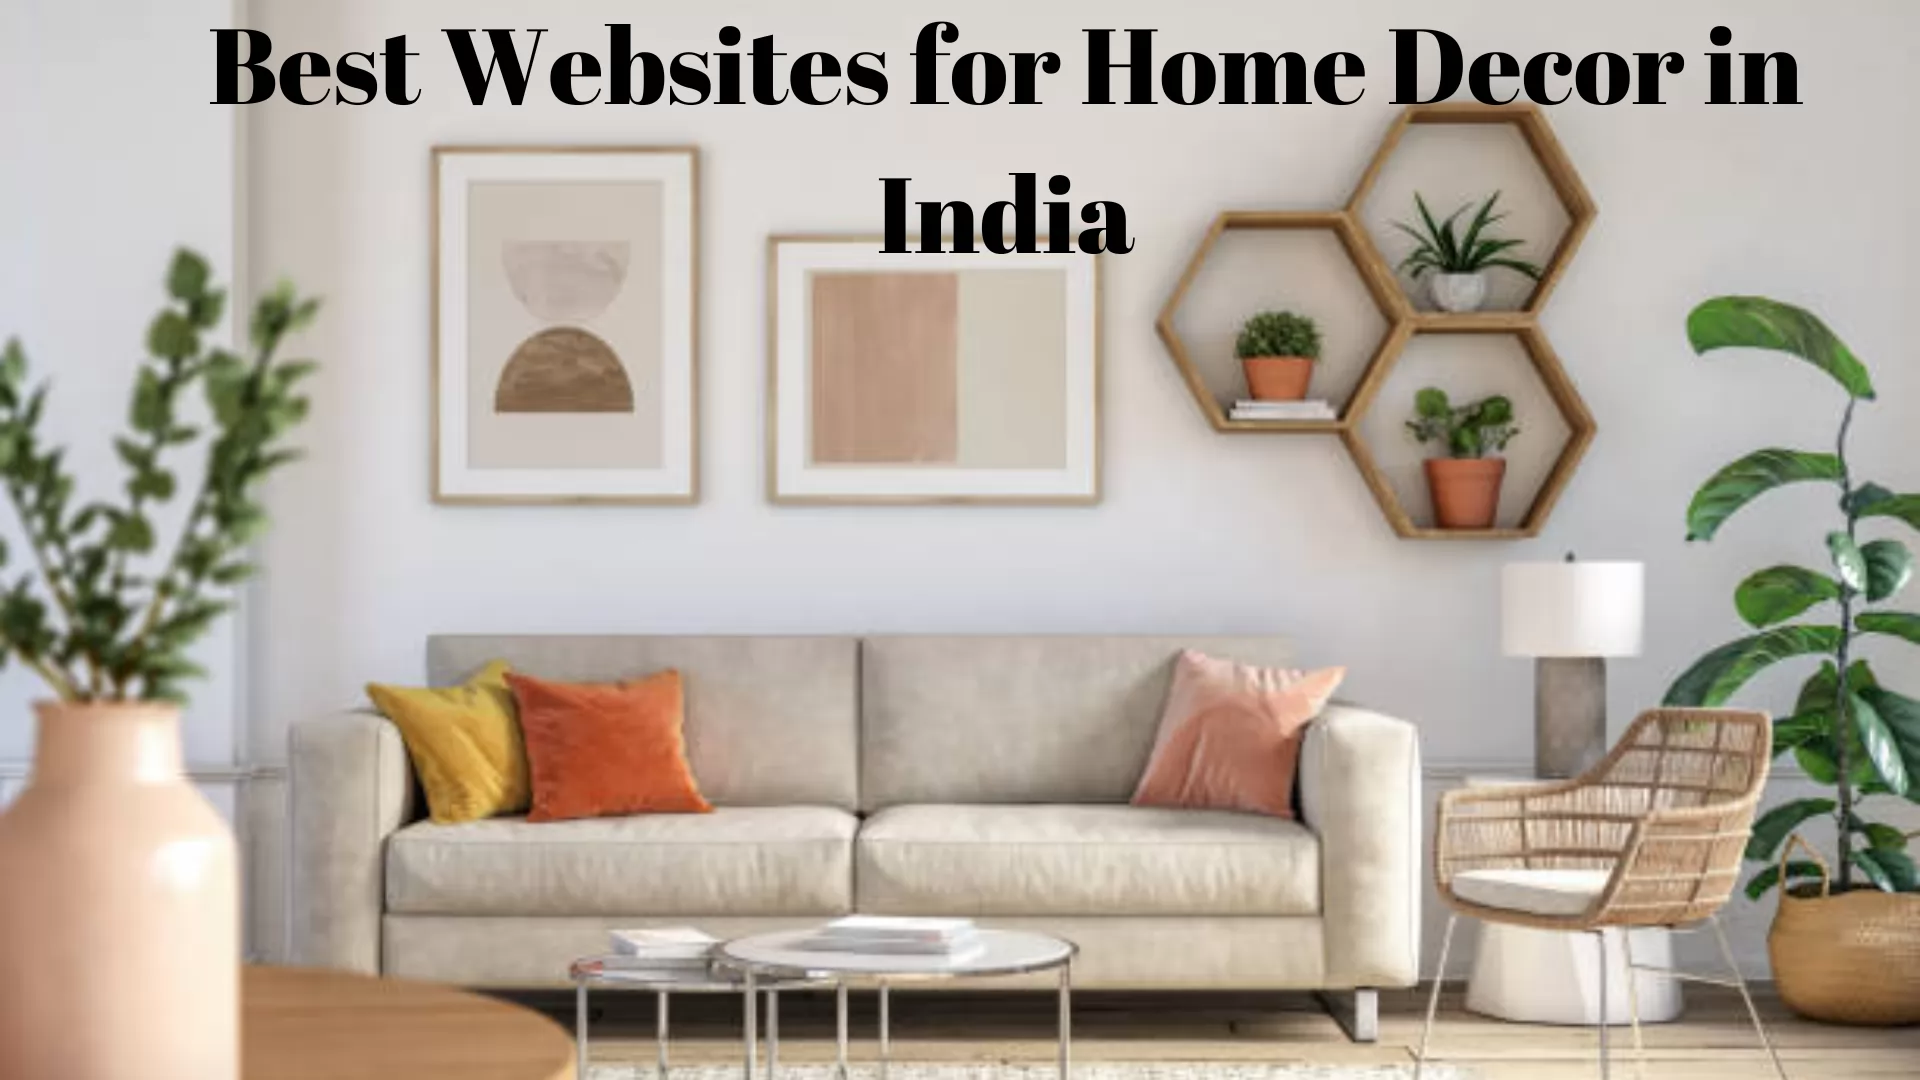 Best Websites for Home Decor in India